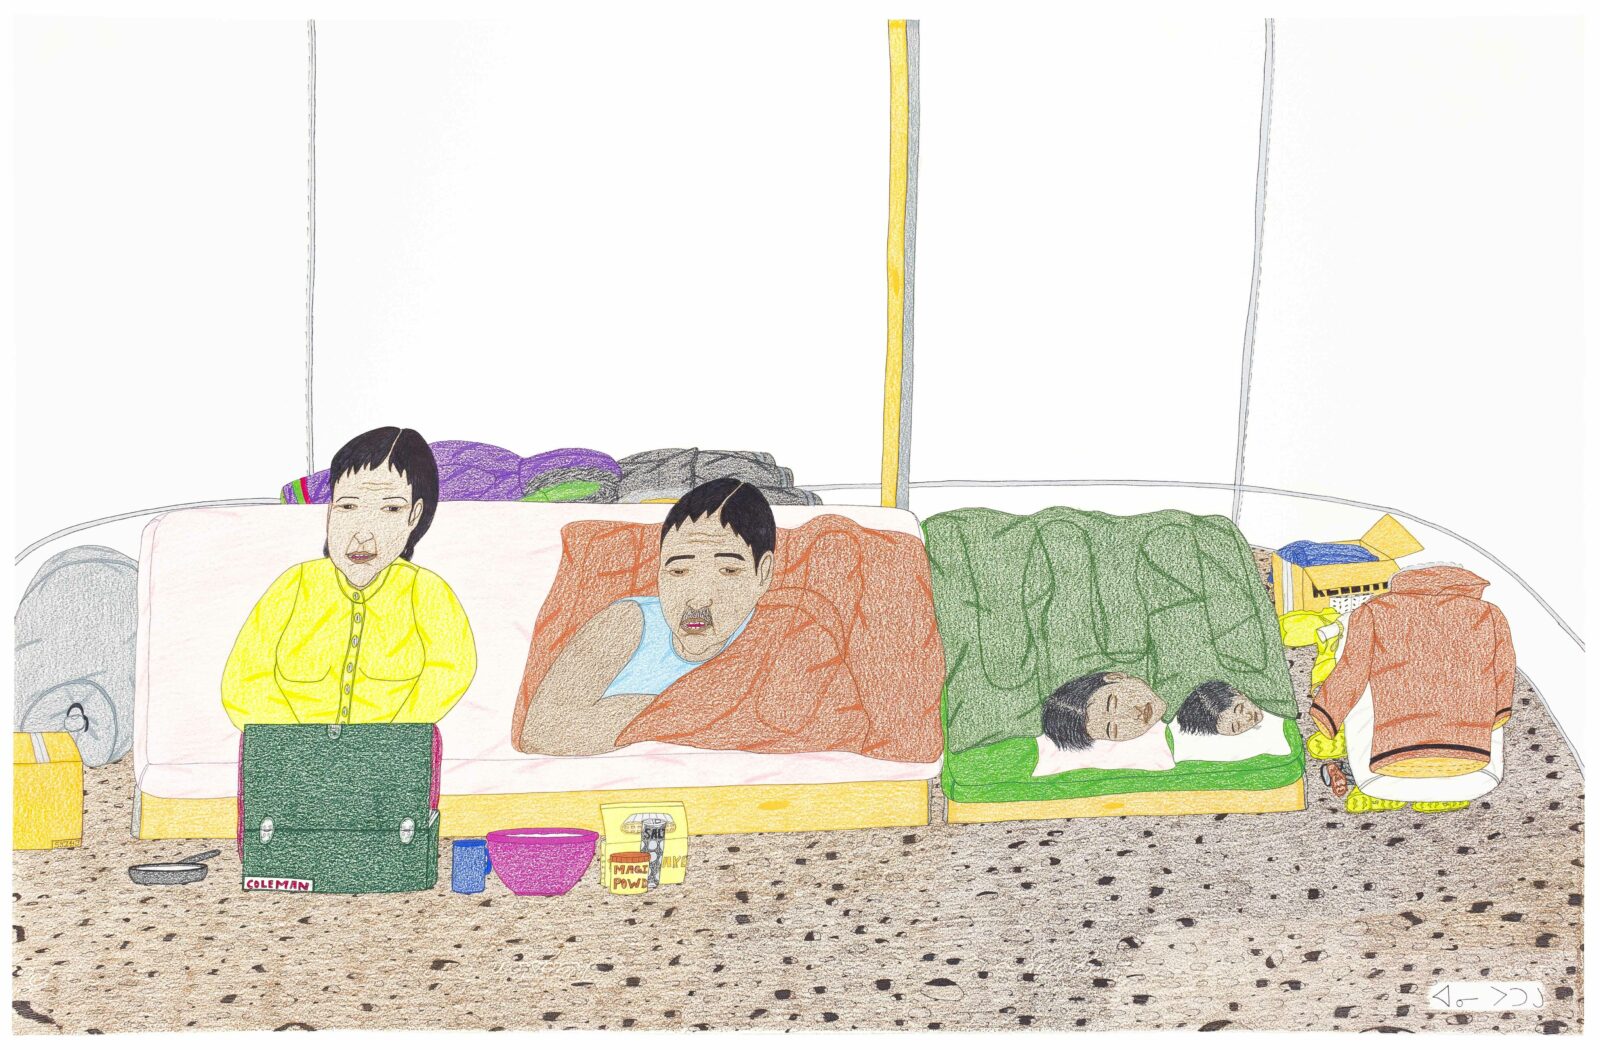 Annie Pootoogook - Family In Tent